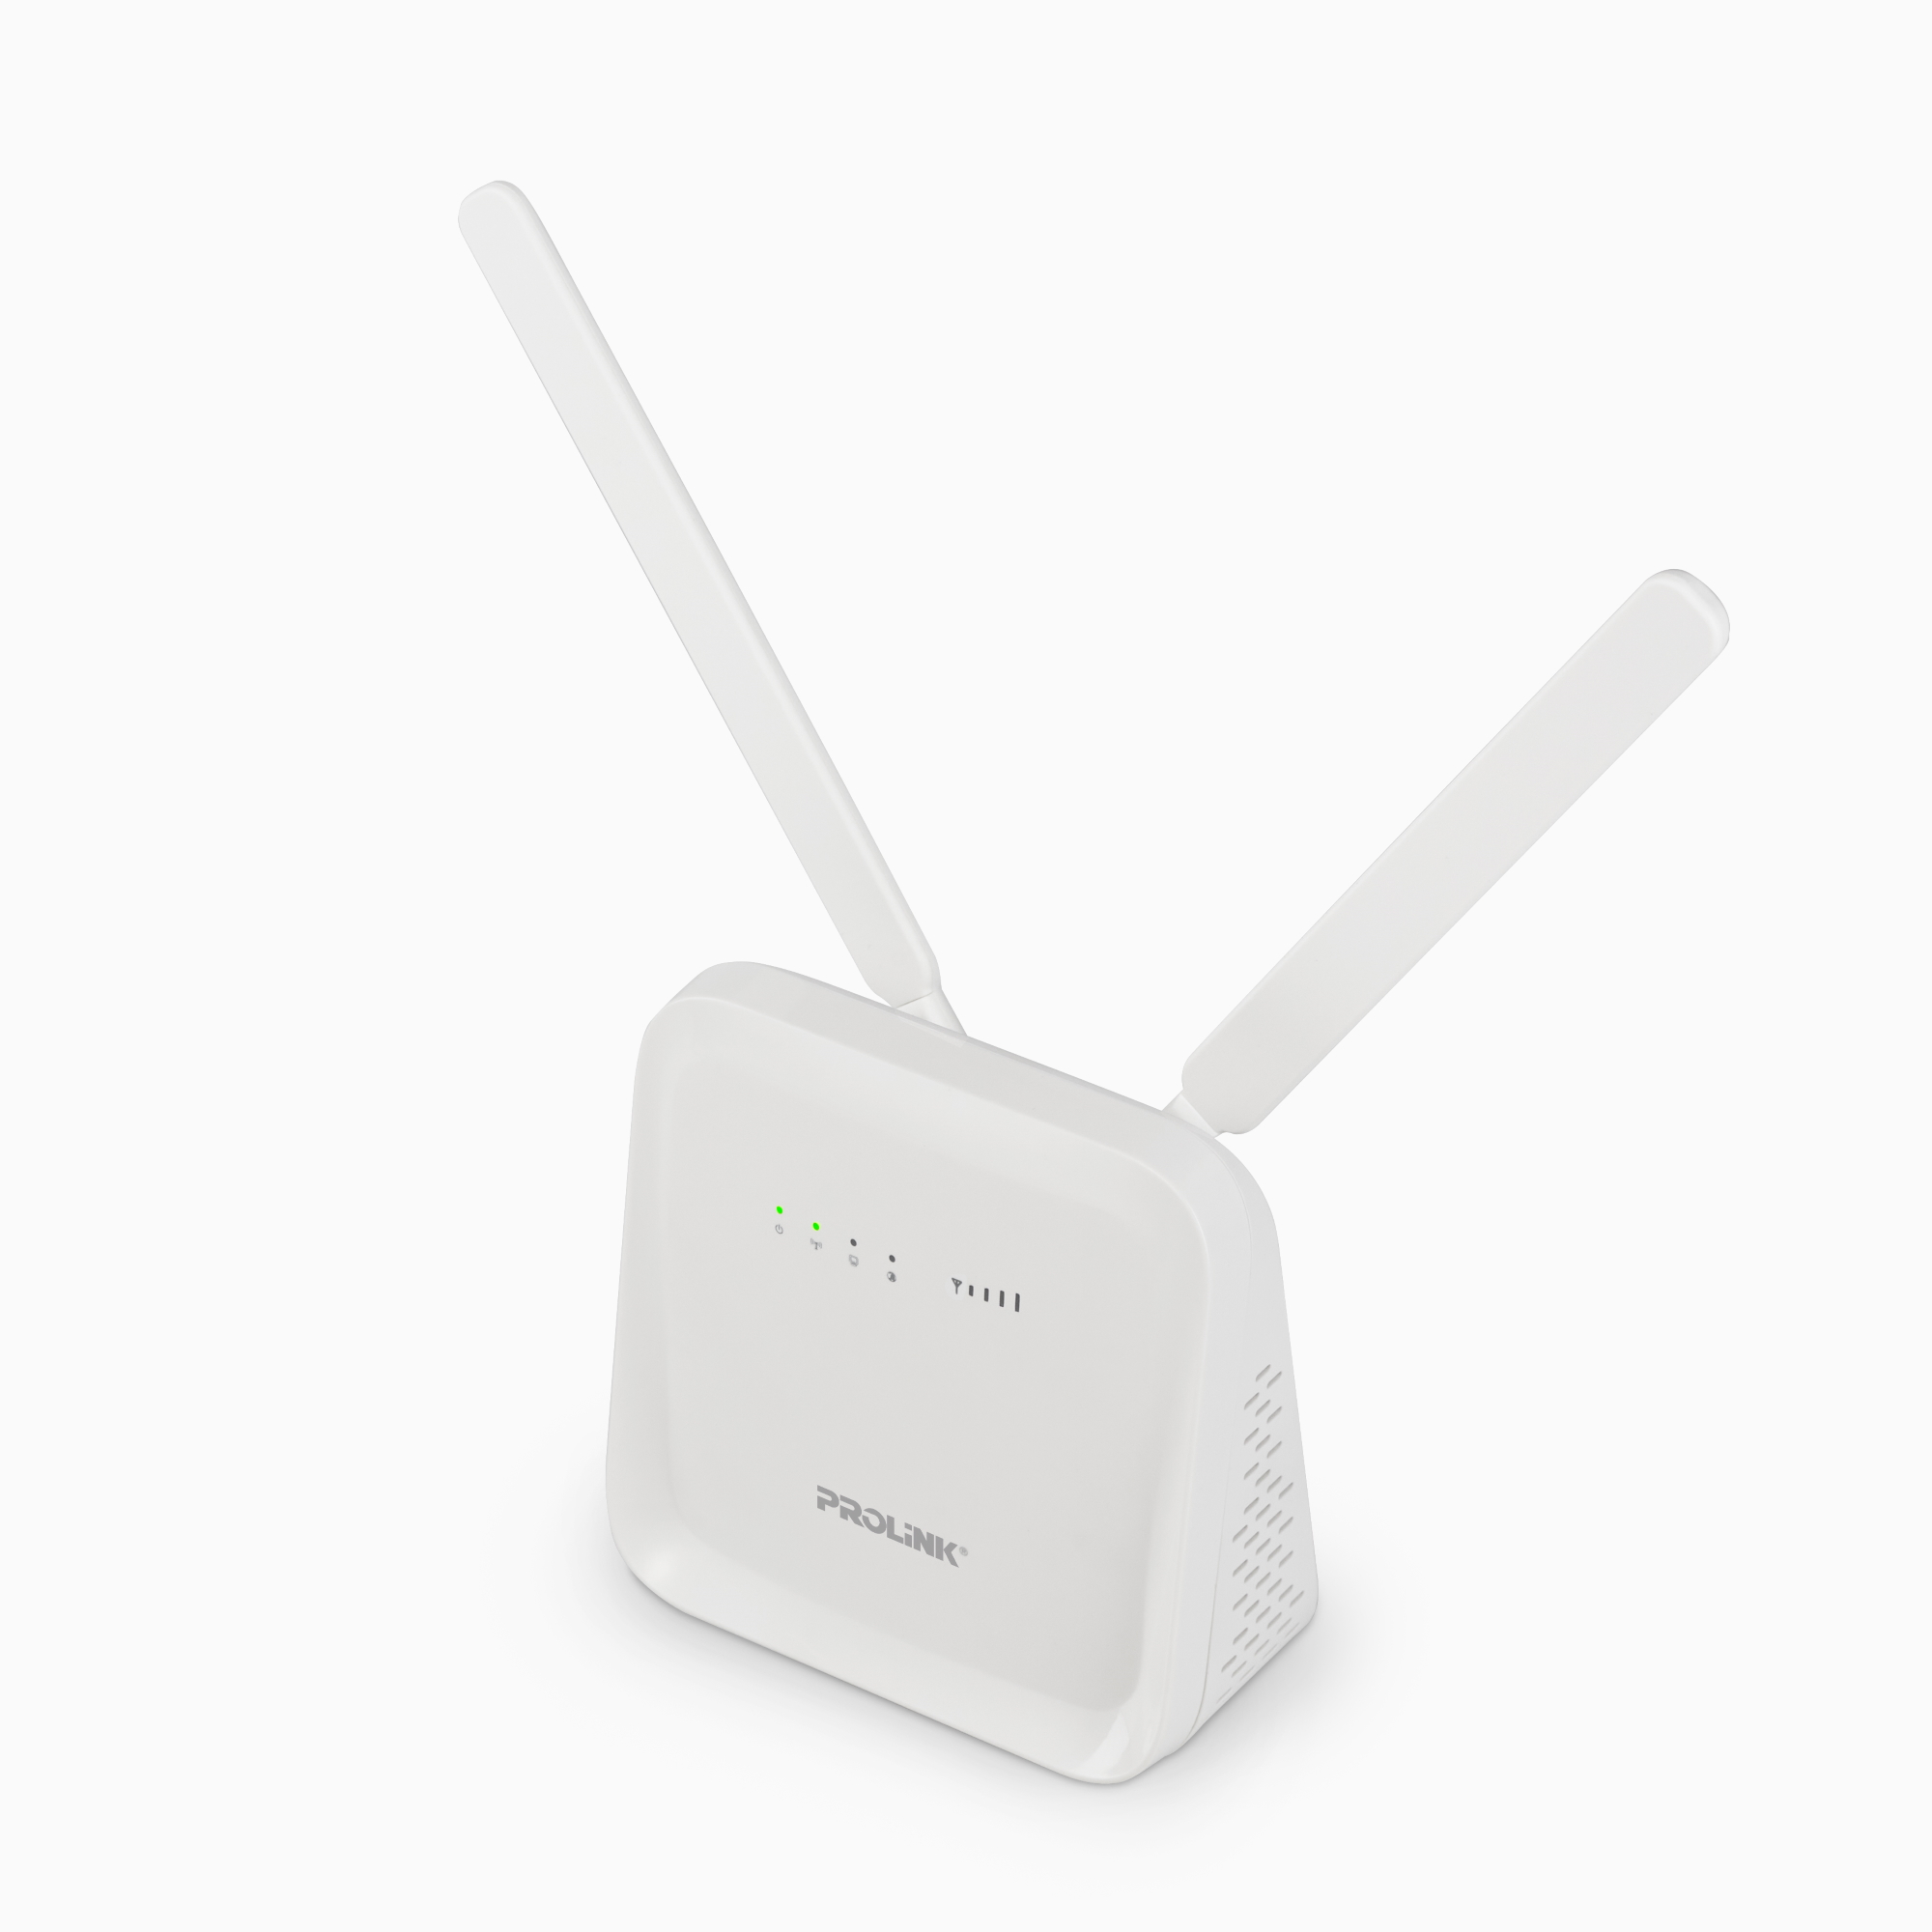 Prolink 4G LTE Unlimited Hotspot WiFi Router with Voice VoLTE/ LAN